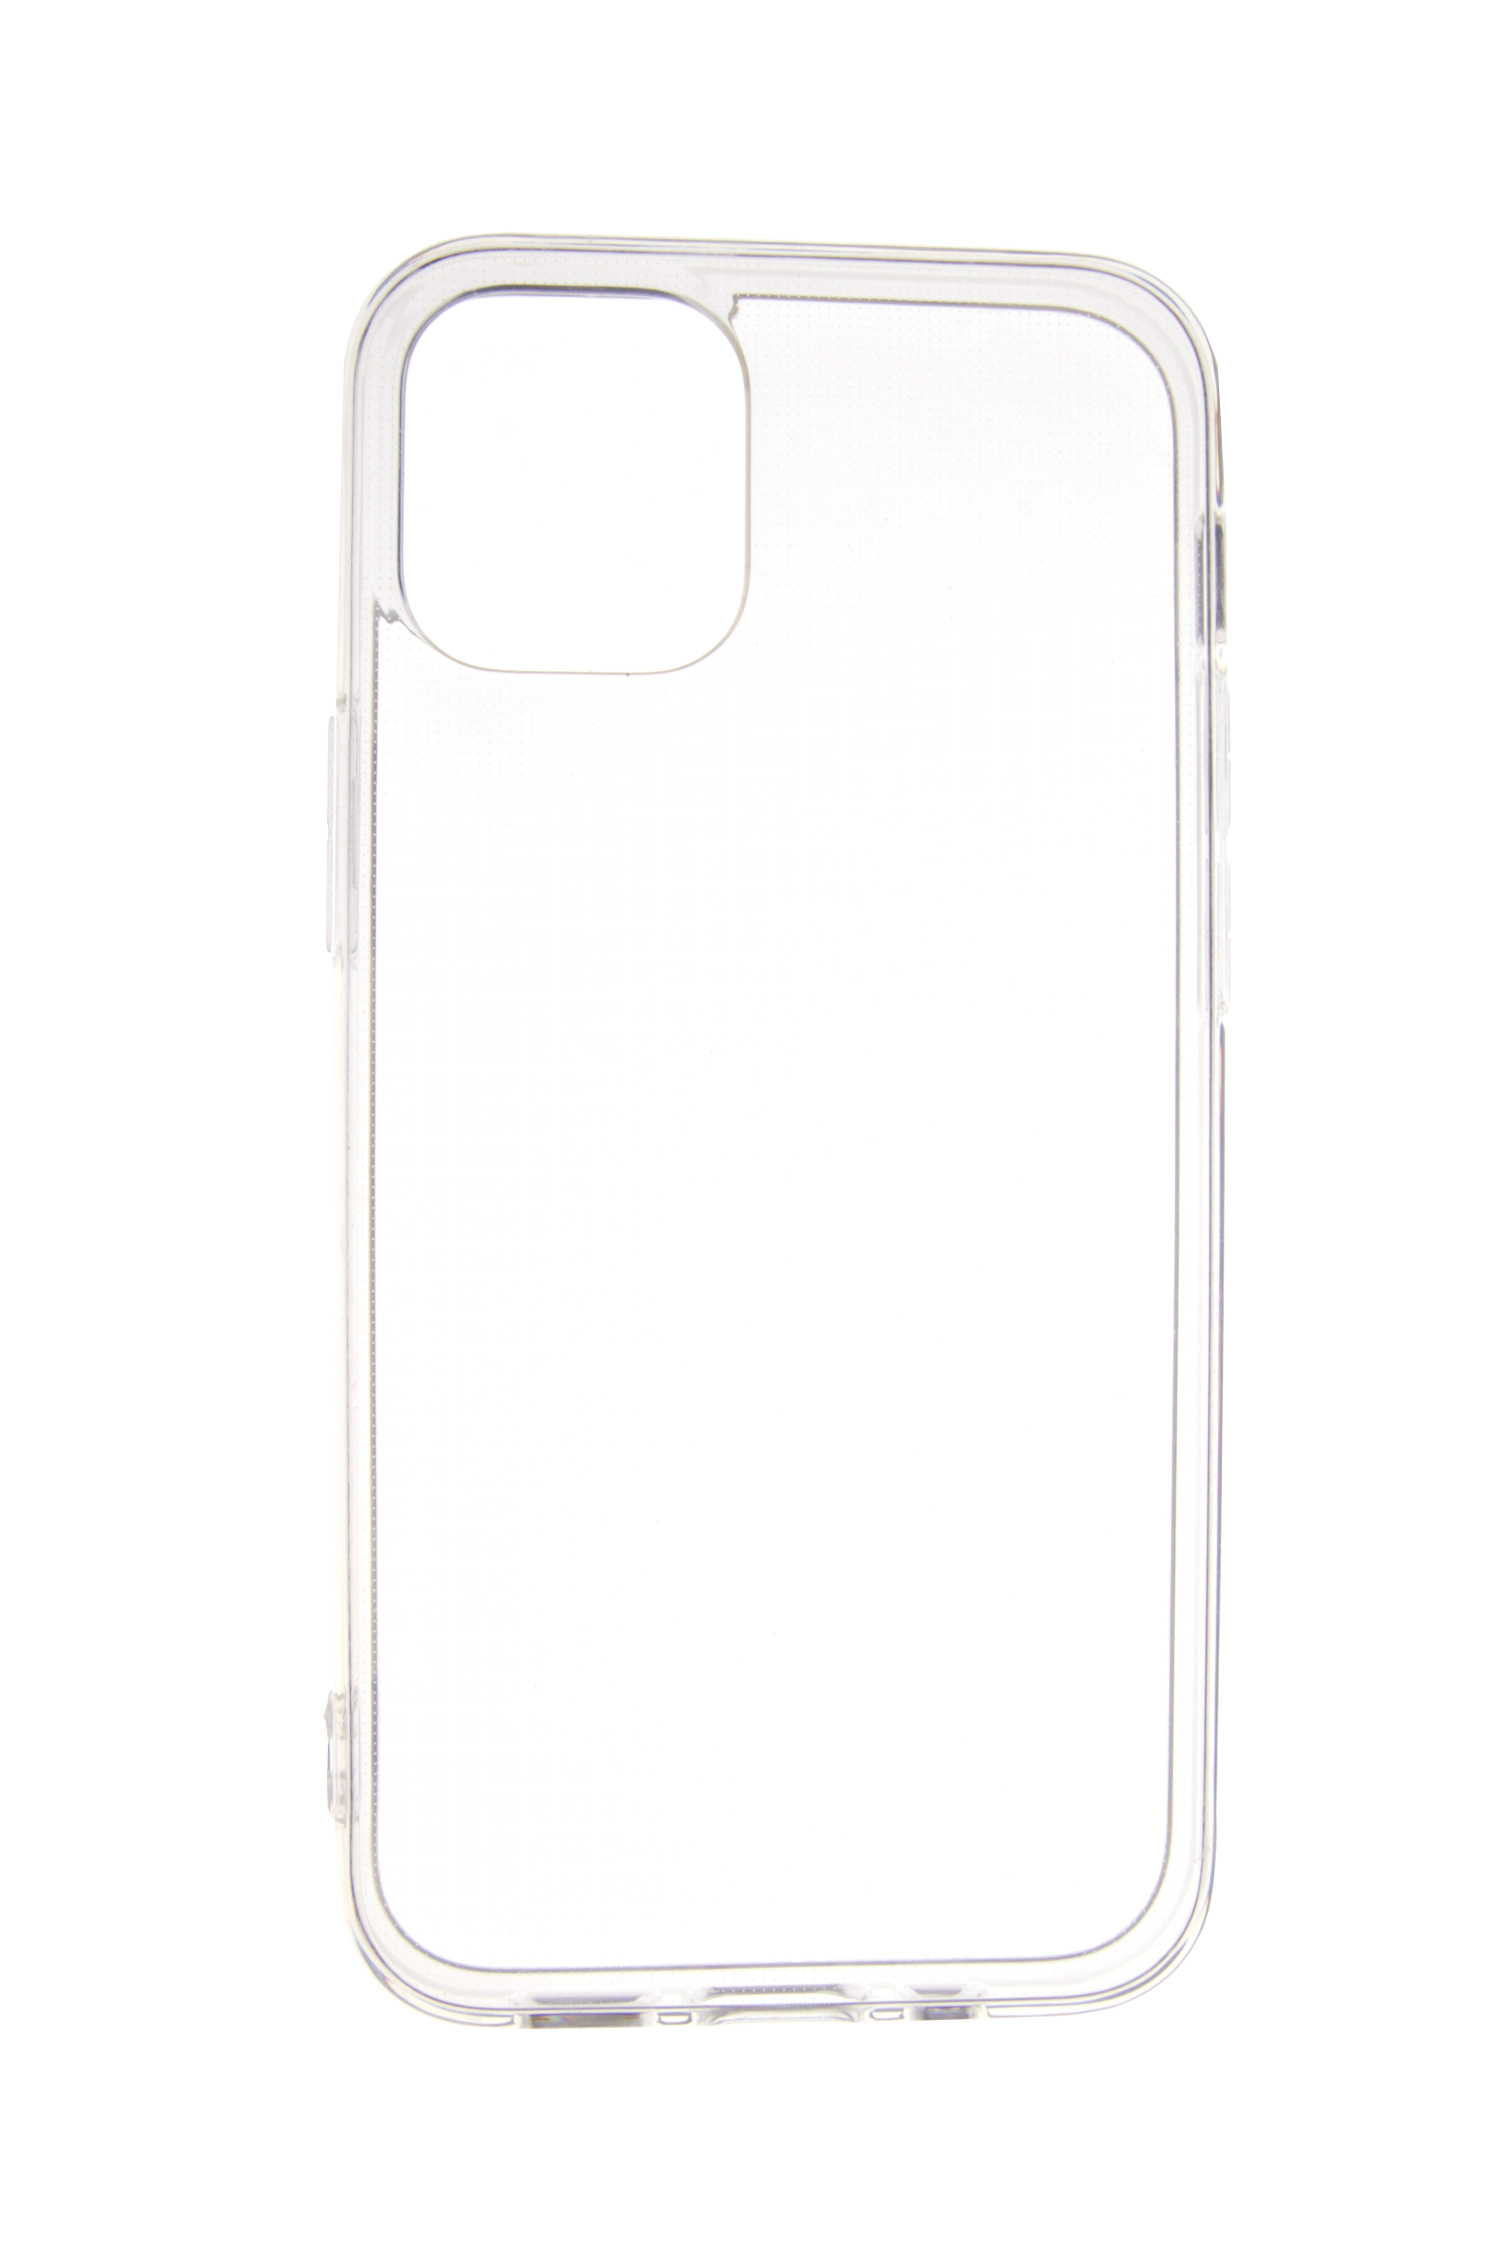 JAMCOVER 2.0 Apple, Transparent TPU Max, mm 12 iPhone Case Pro Strong, Backcover